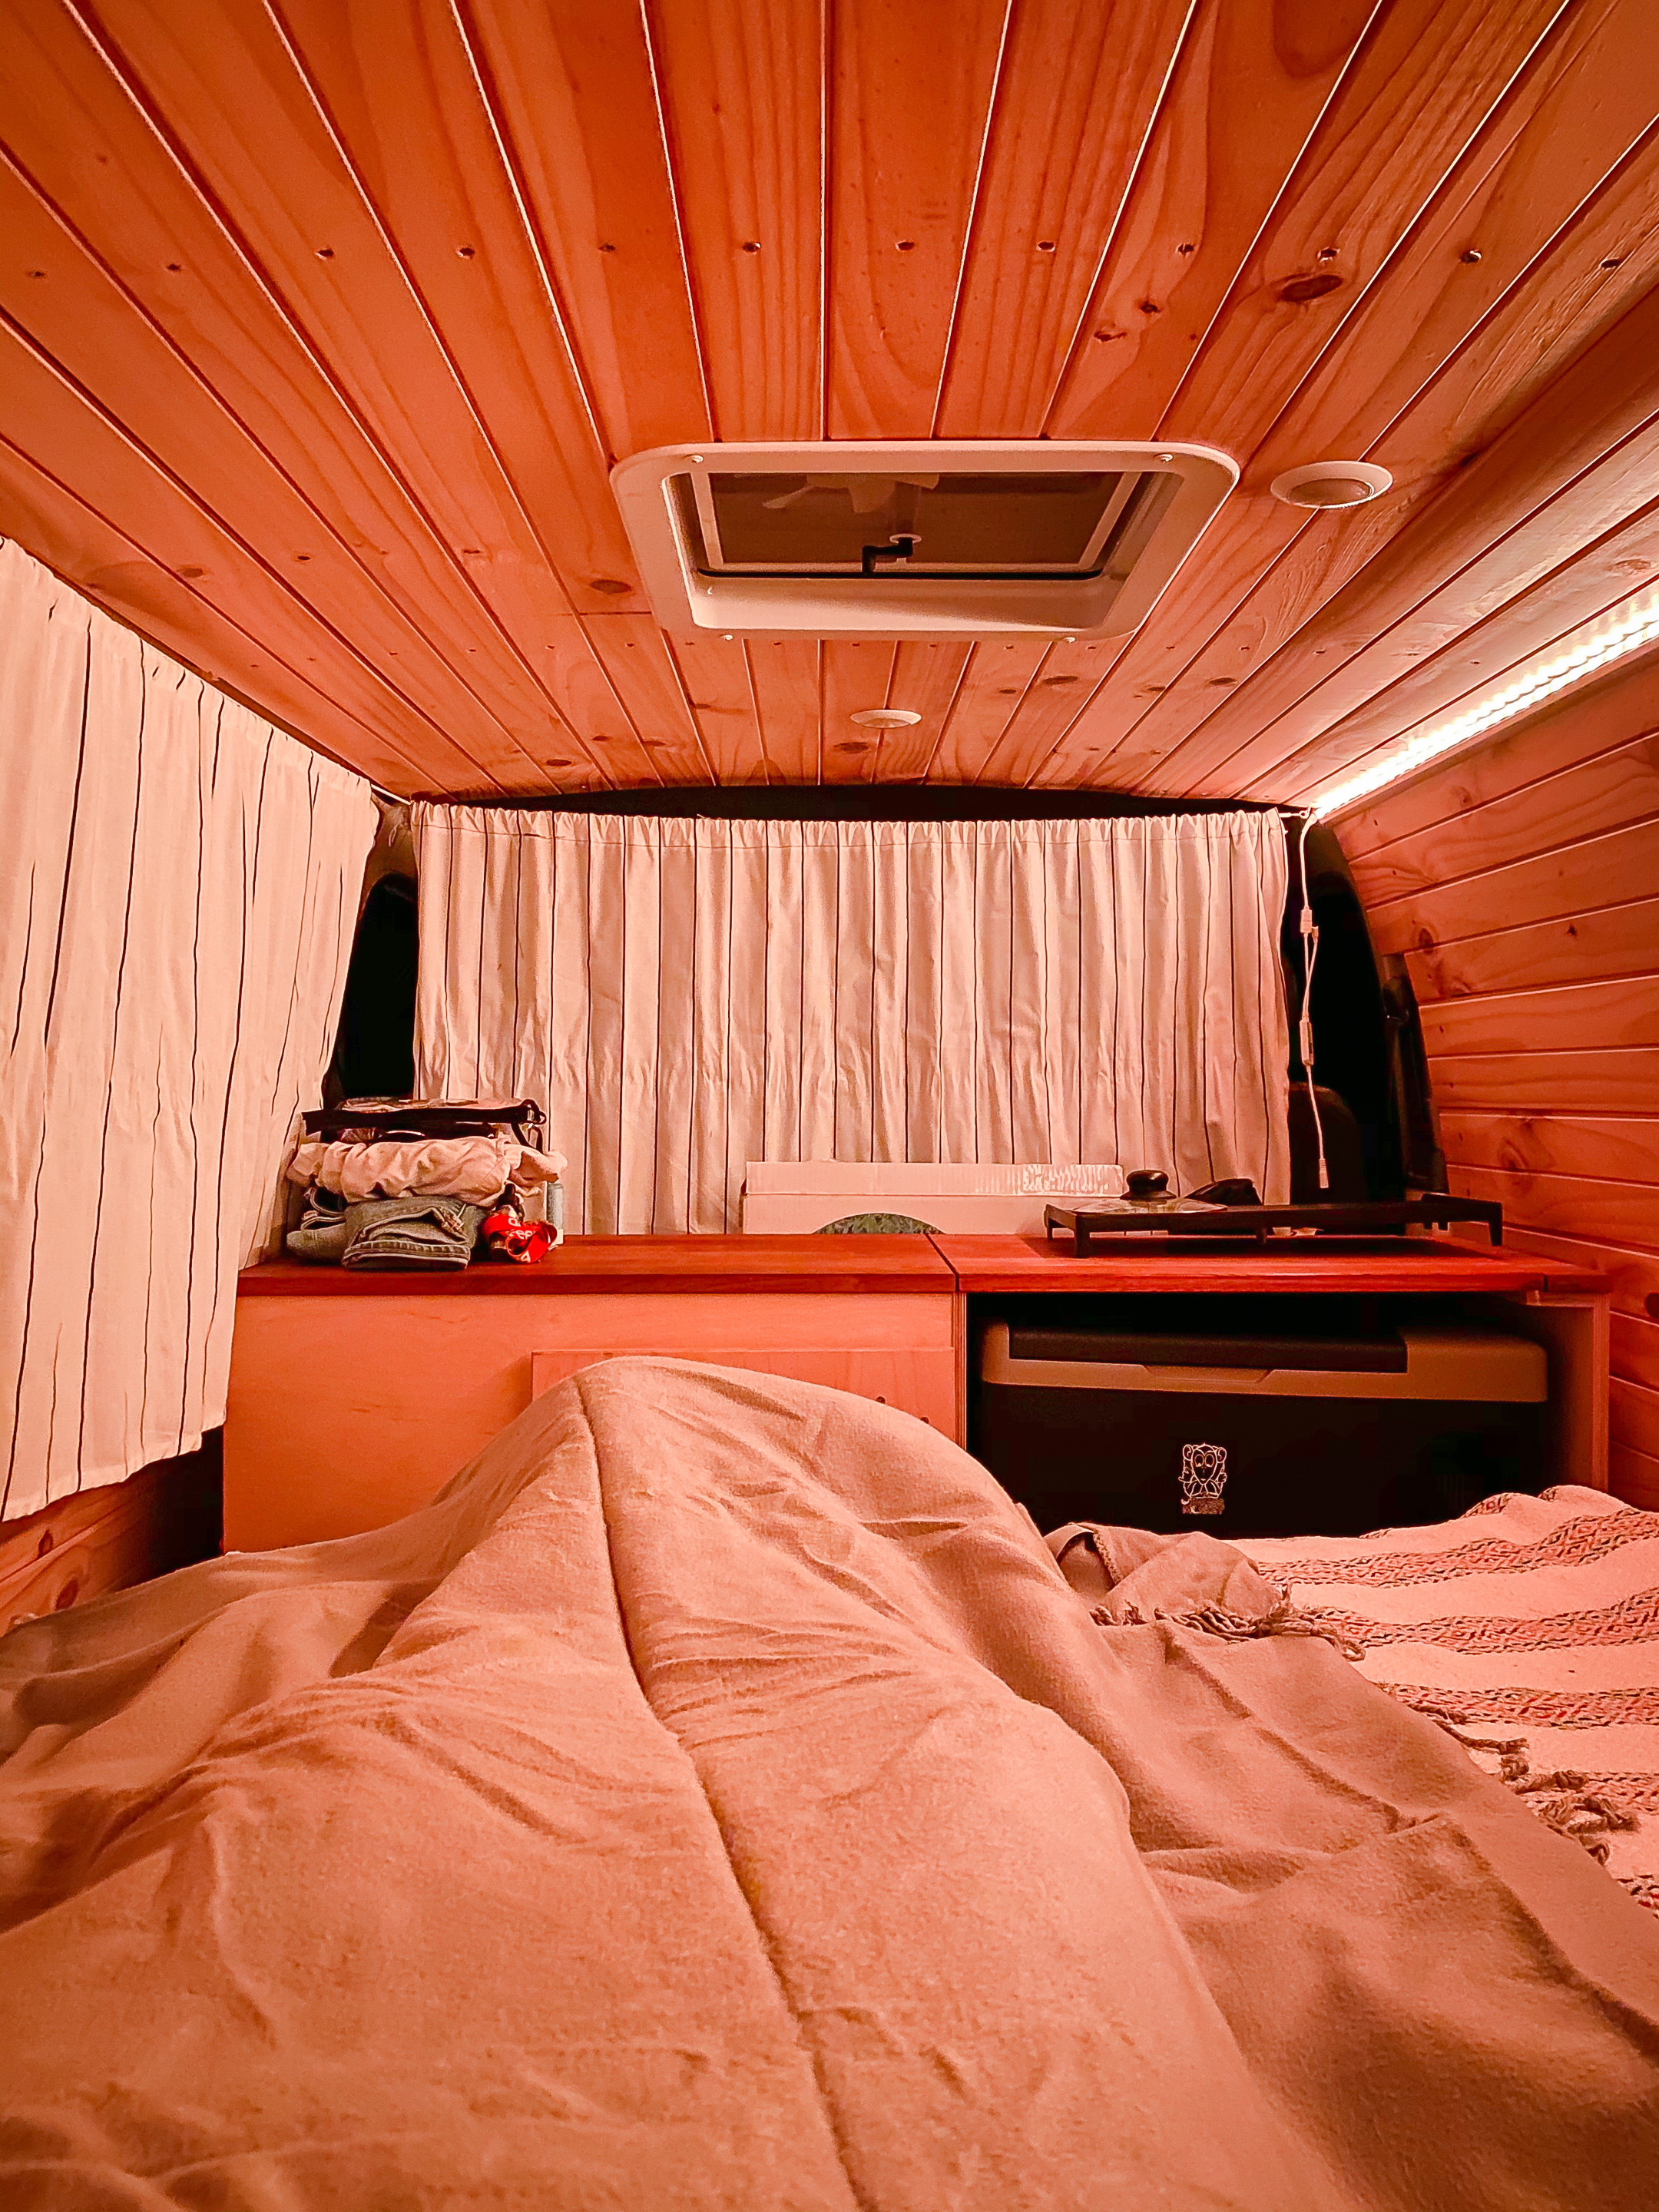 Photo of the bed inside the van